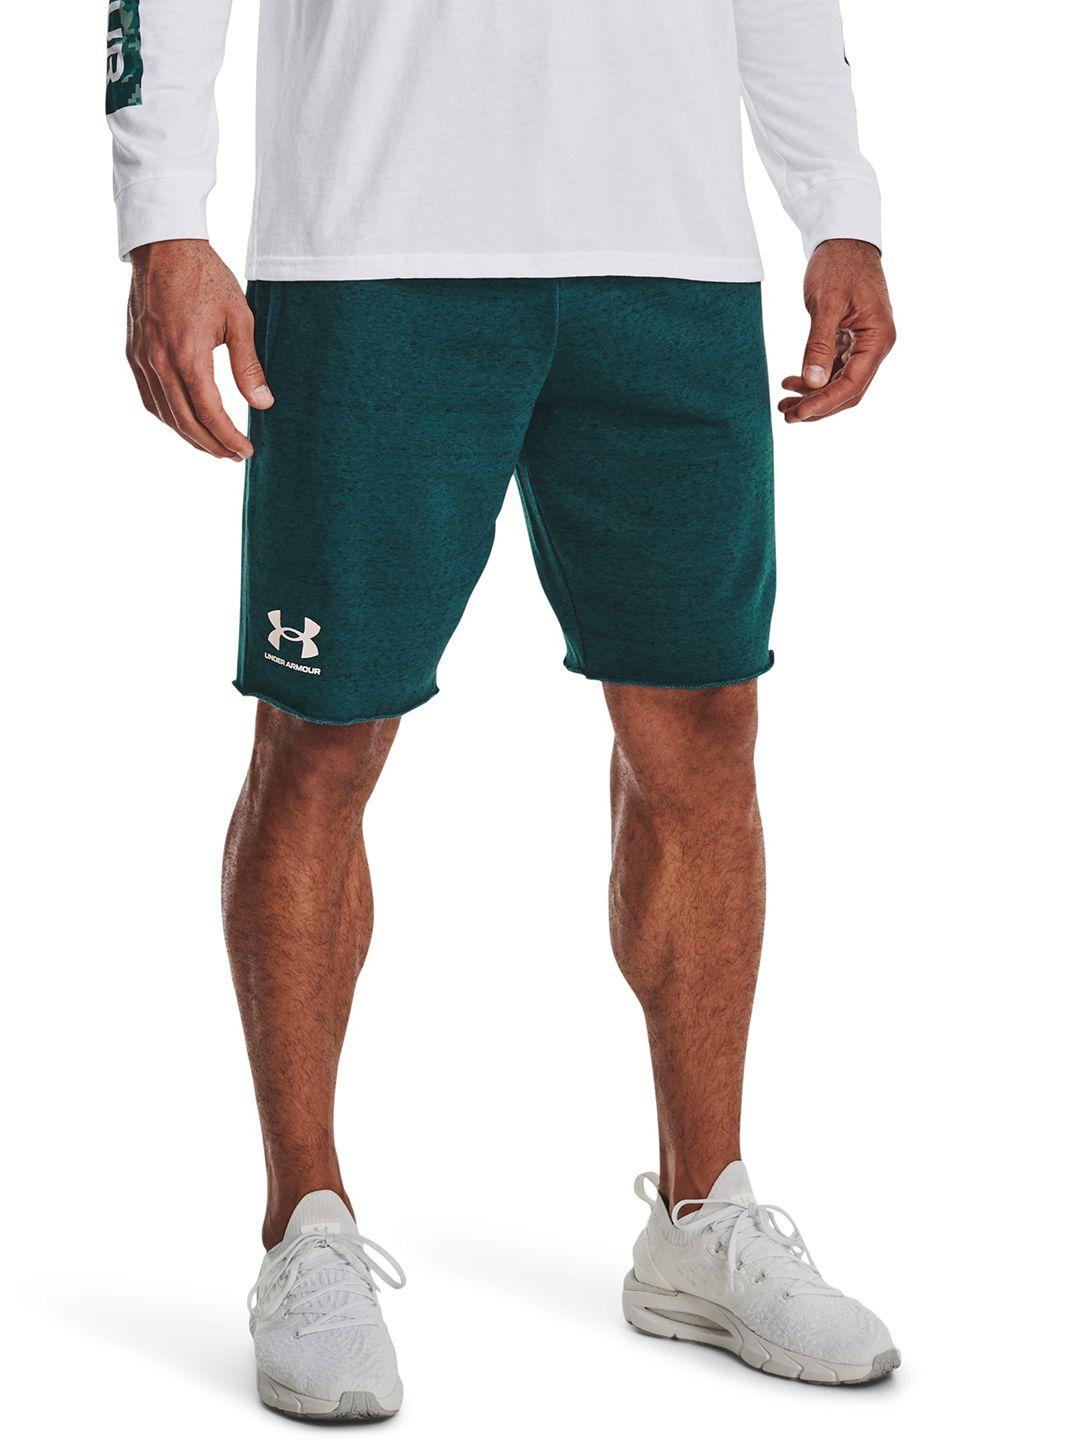 under-armour-men-low-rise-training-or-gym-sports-shorts